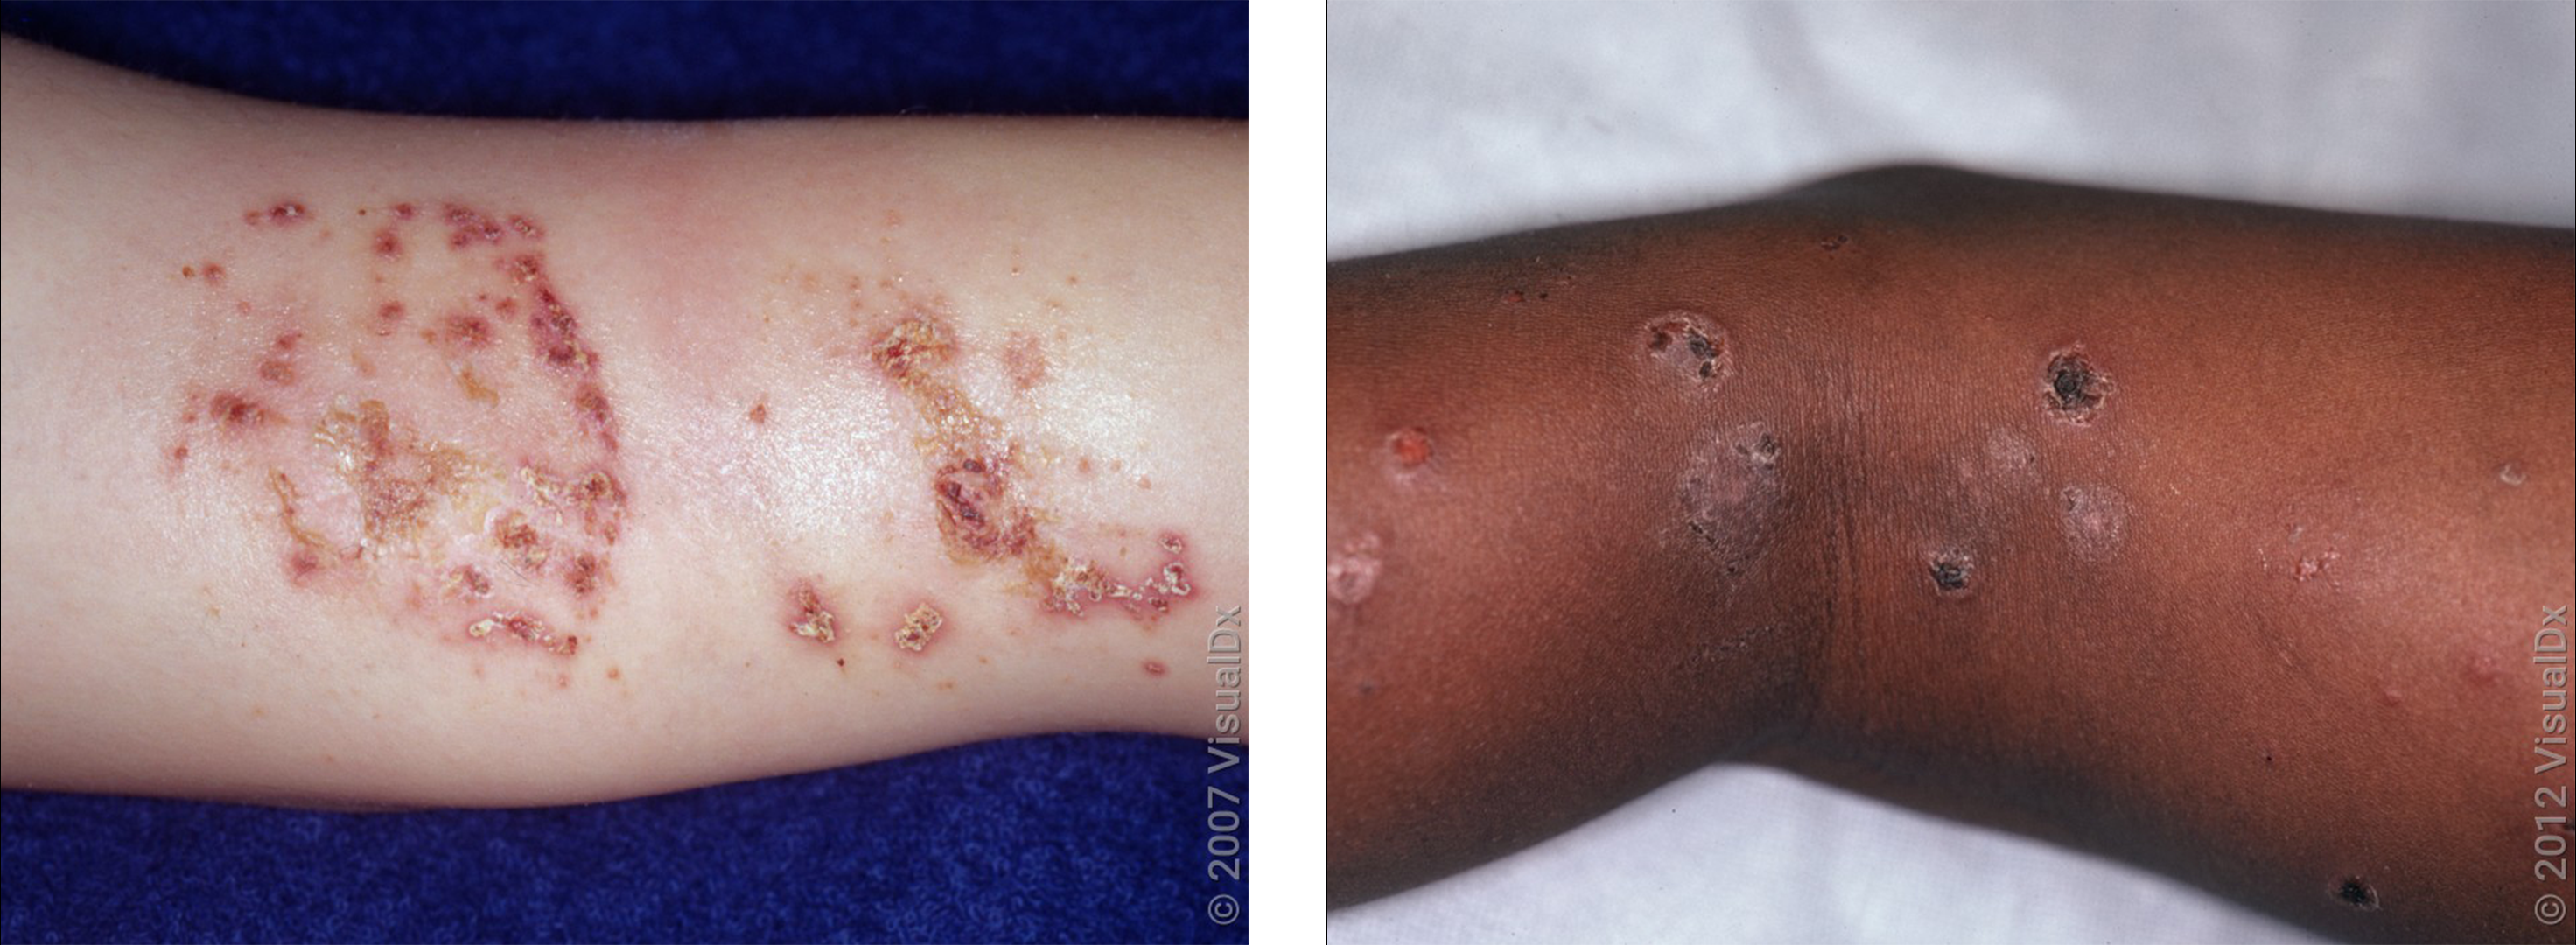 Left: Open sores and crusts on the arm. Right: Several round crusts on the skin.